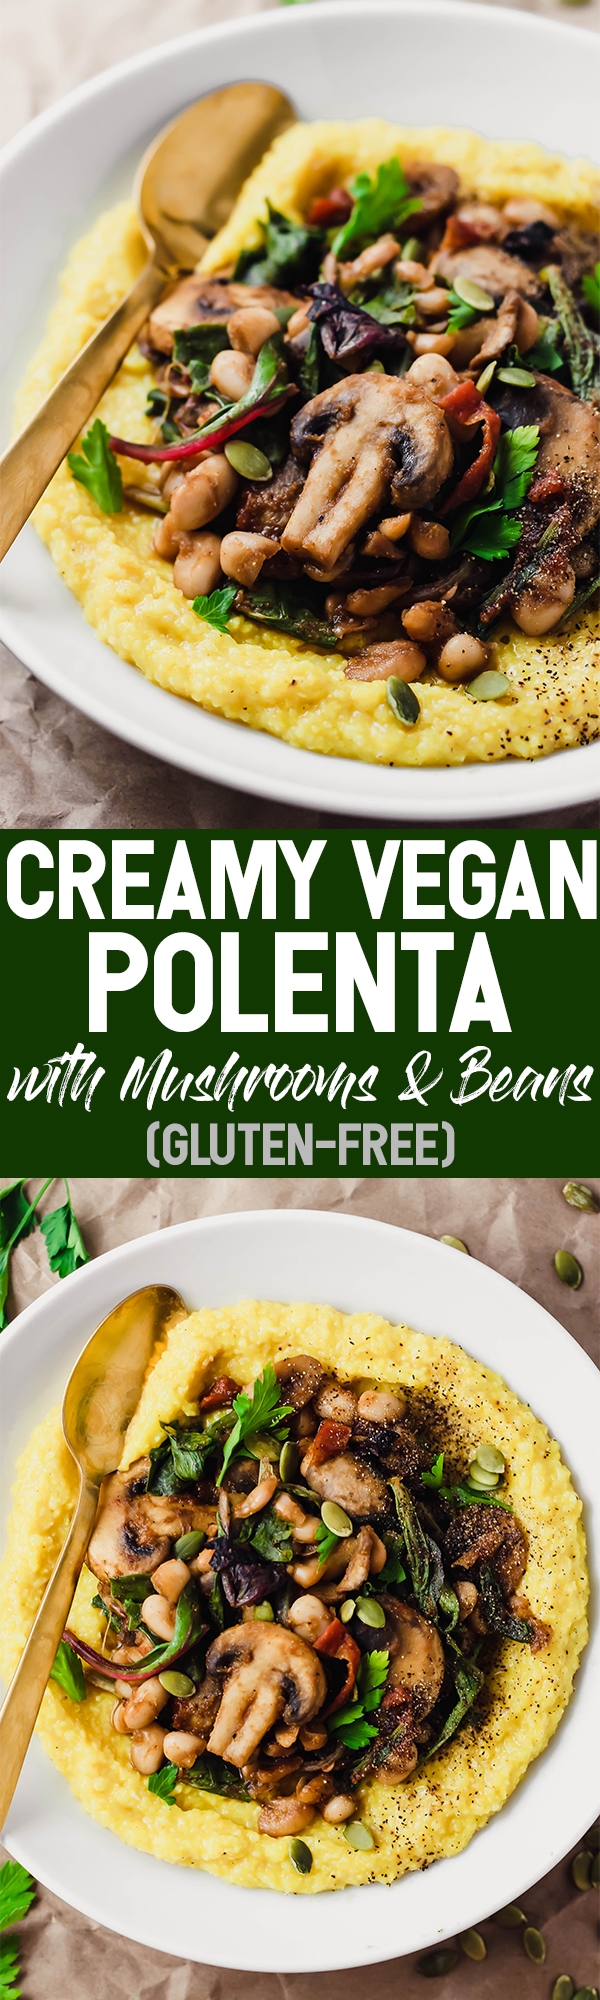 This Creamy Vegan Polenta with Mushrooms and Beans is an easy 30-minute dinner packed with whole grains, plant protein, and vegetables. Leftovers make great lunches!